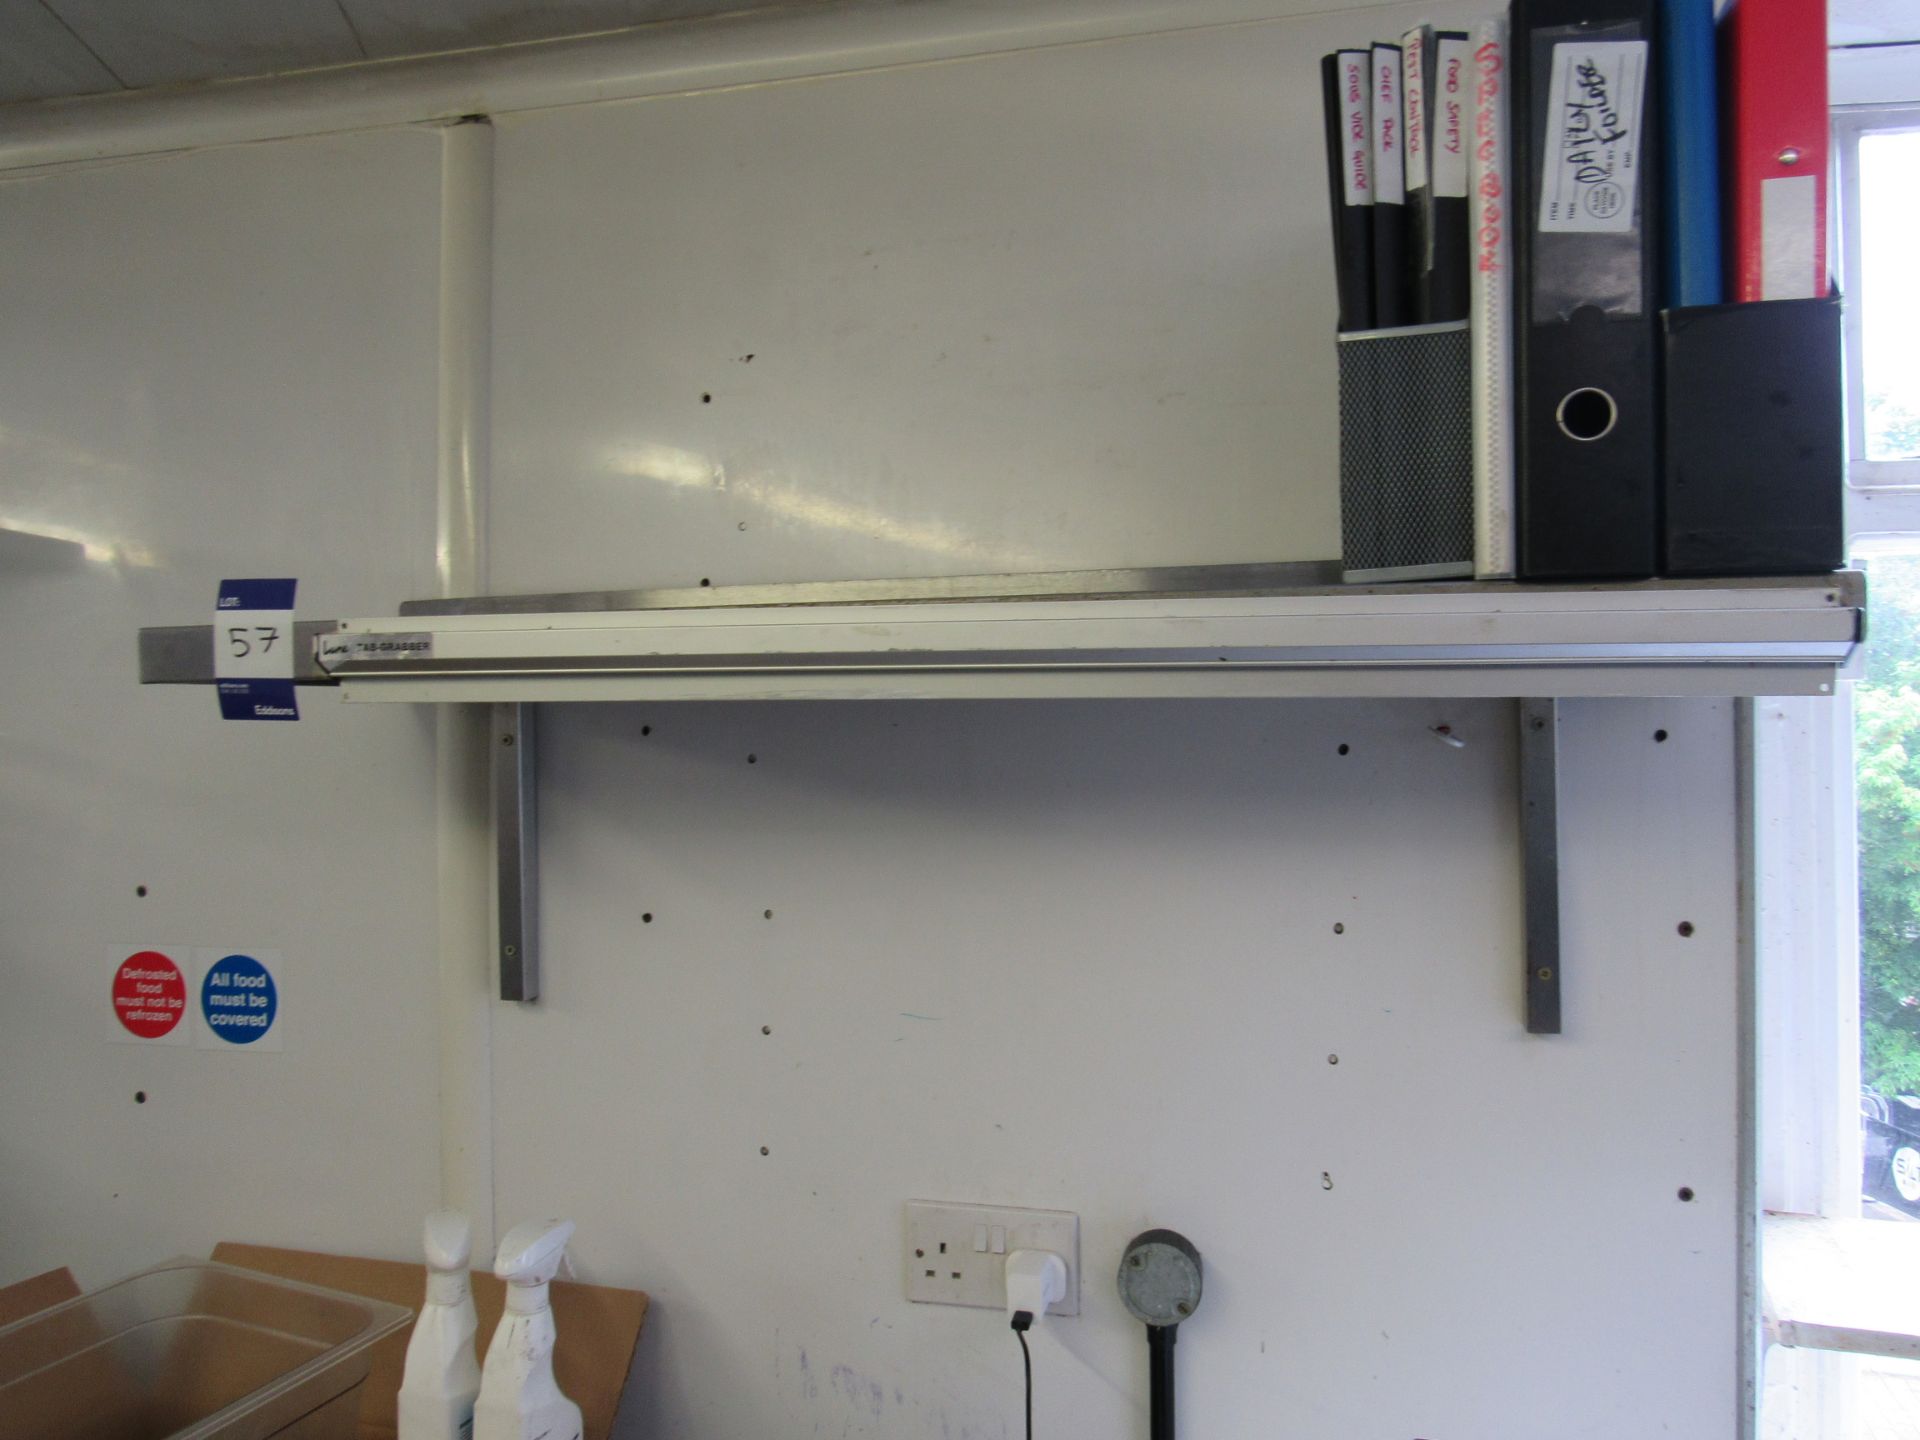 Stainless steel wall mounted shelf unit